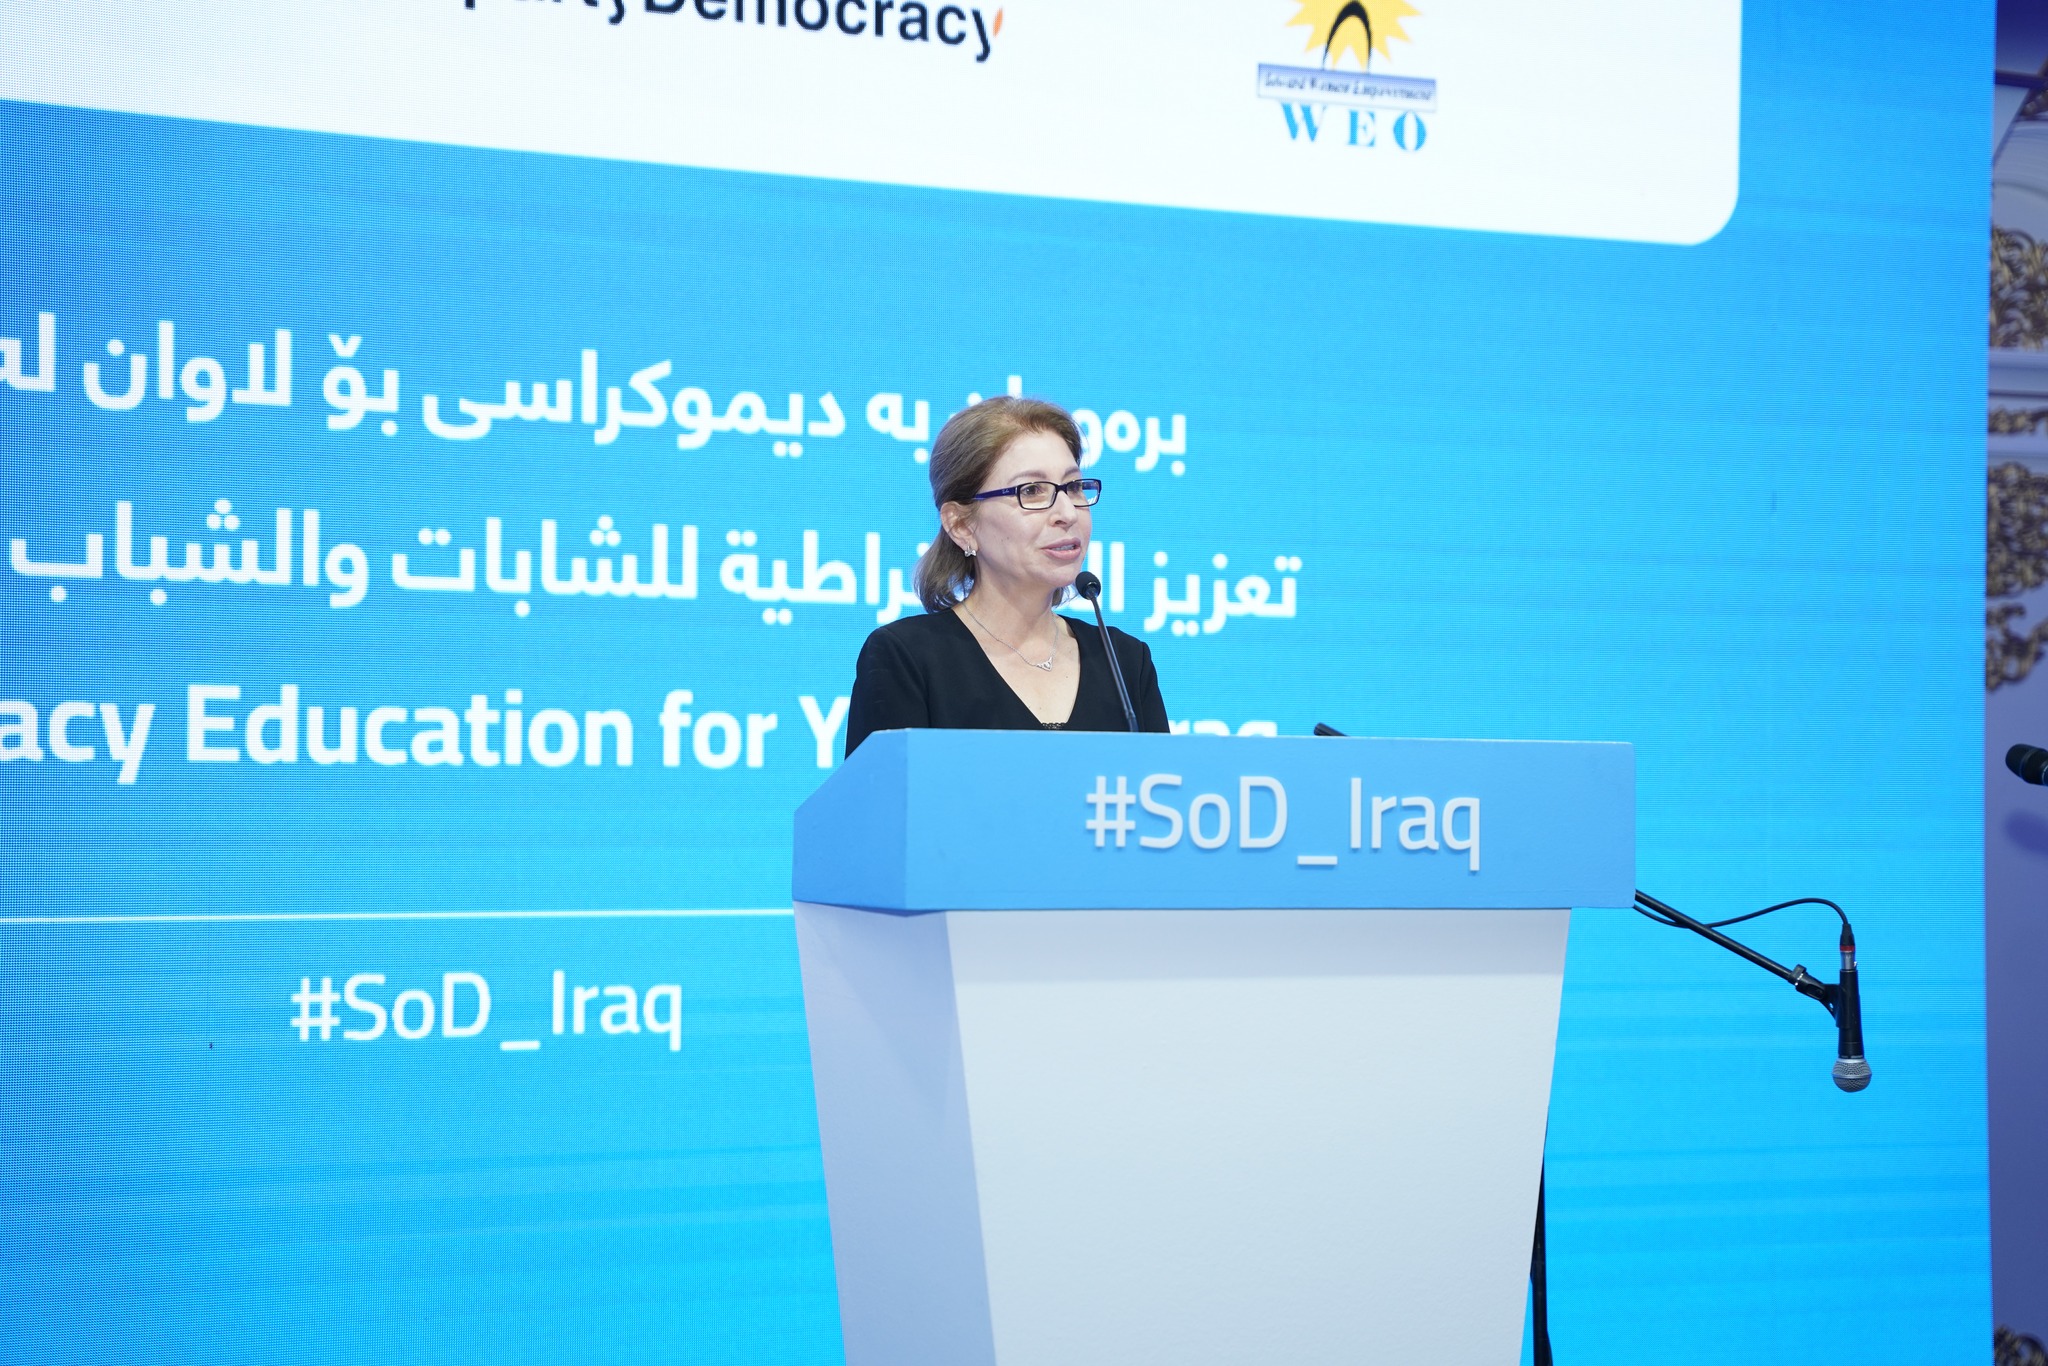 Democracy Education for Youth in Iraq